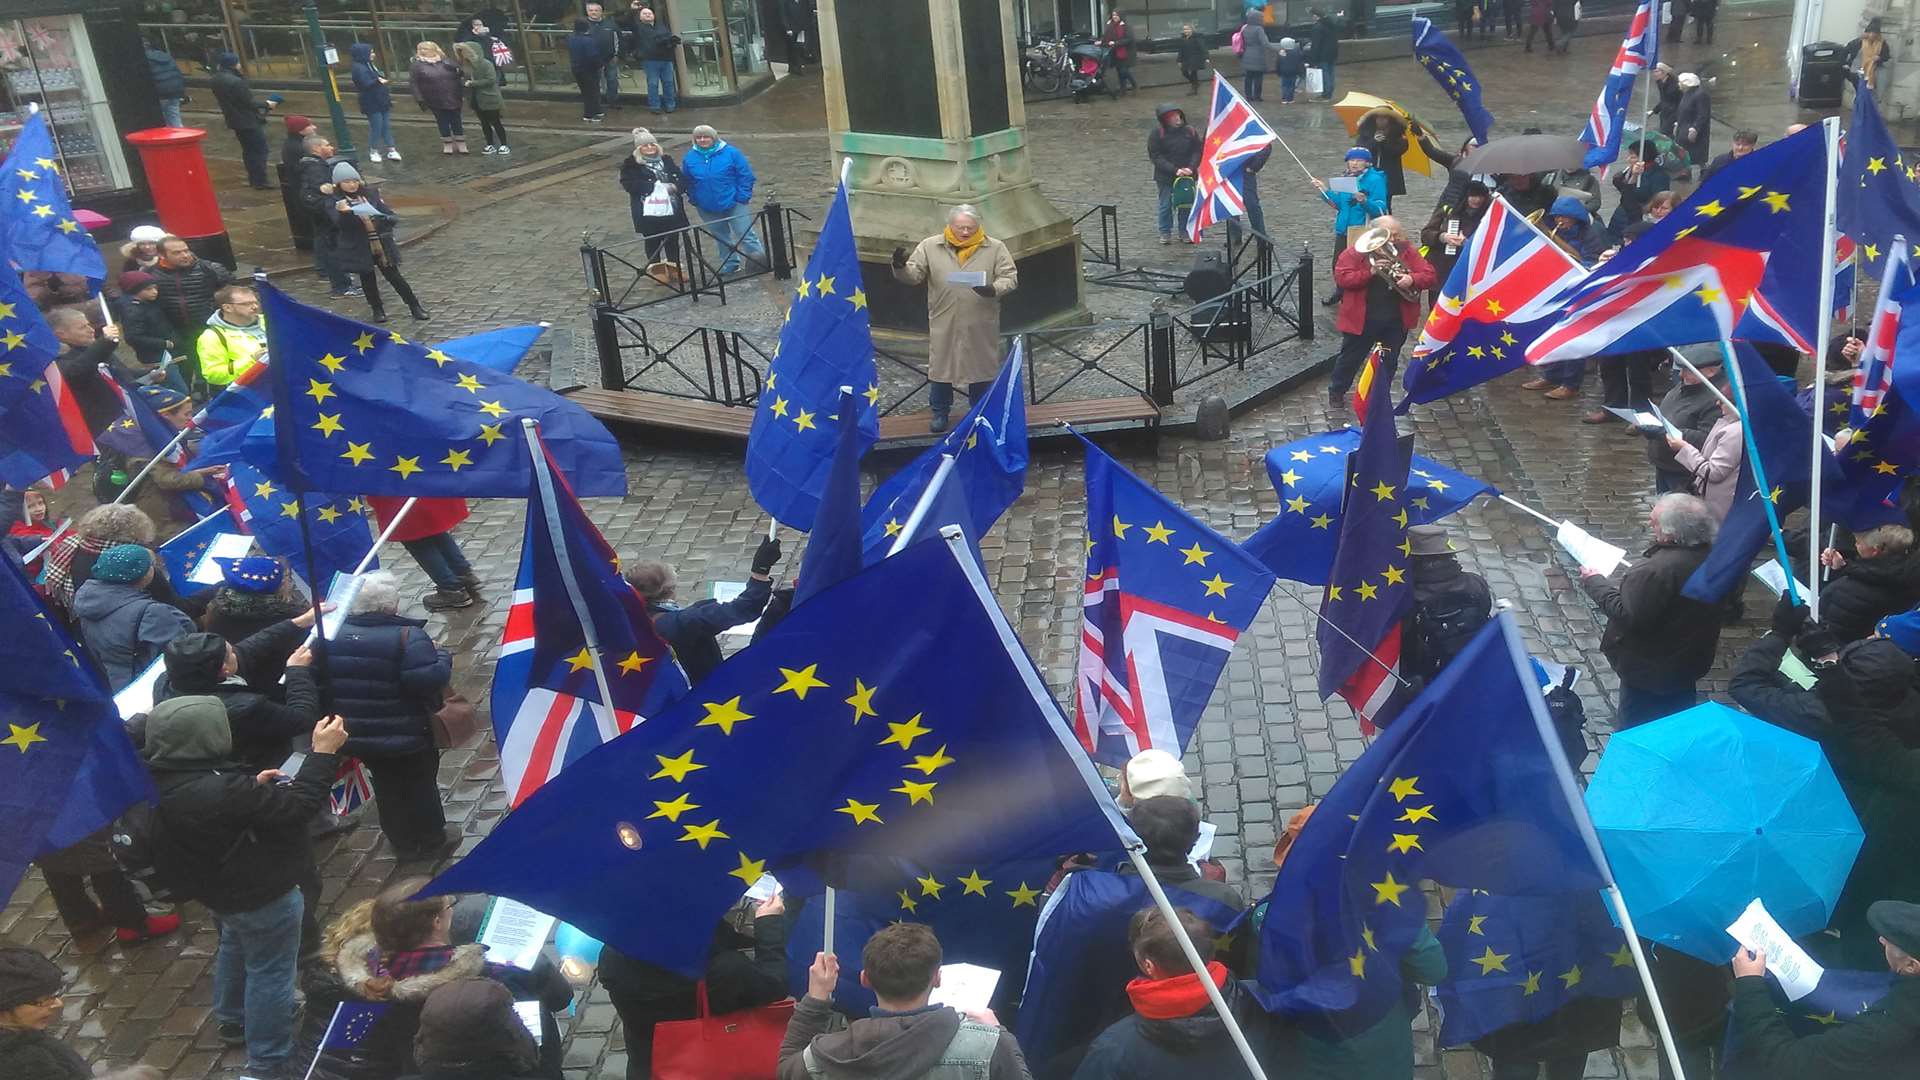 The pro-Brexit flash mob demonstration in Canterbury